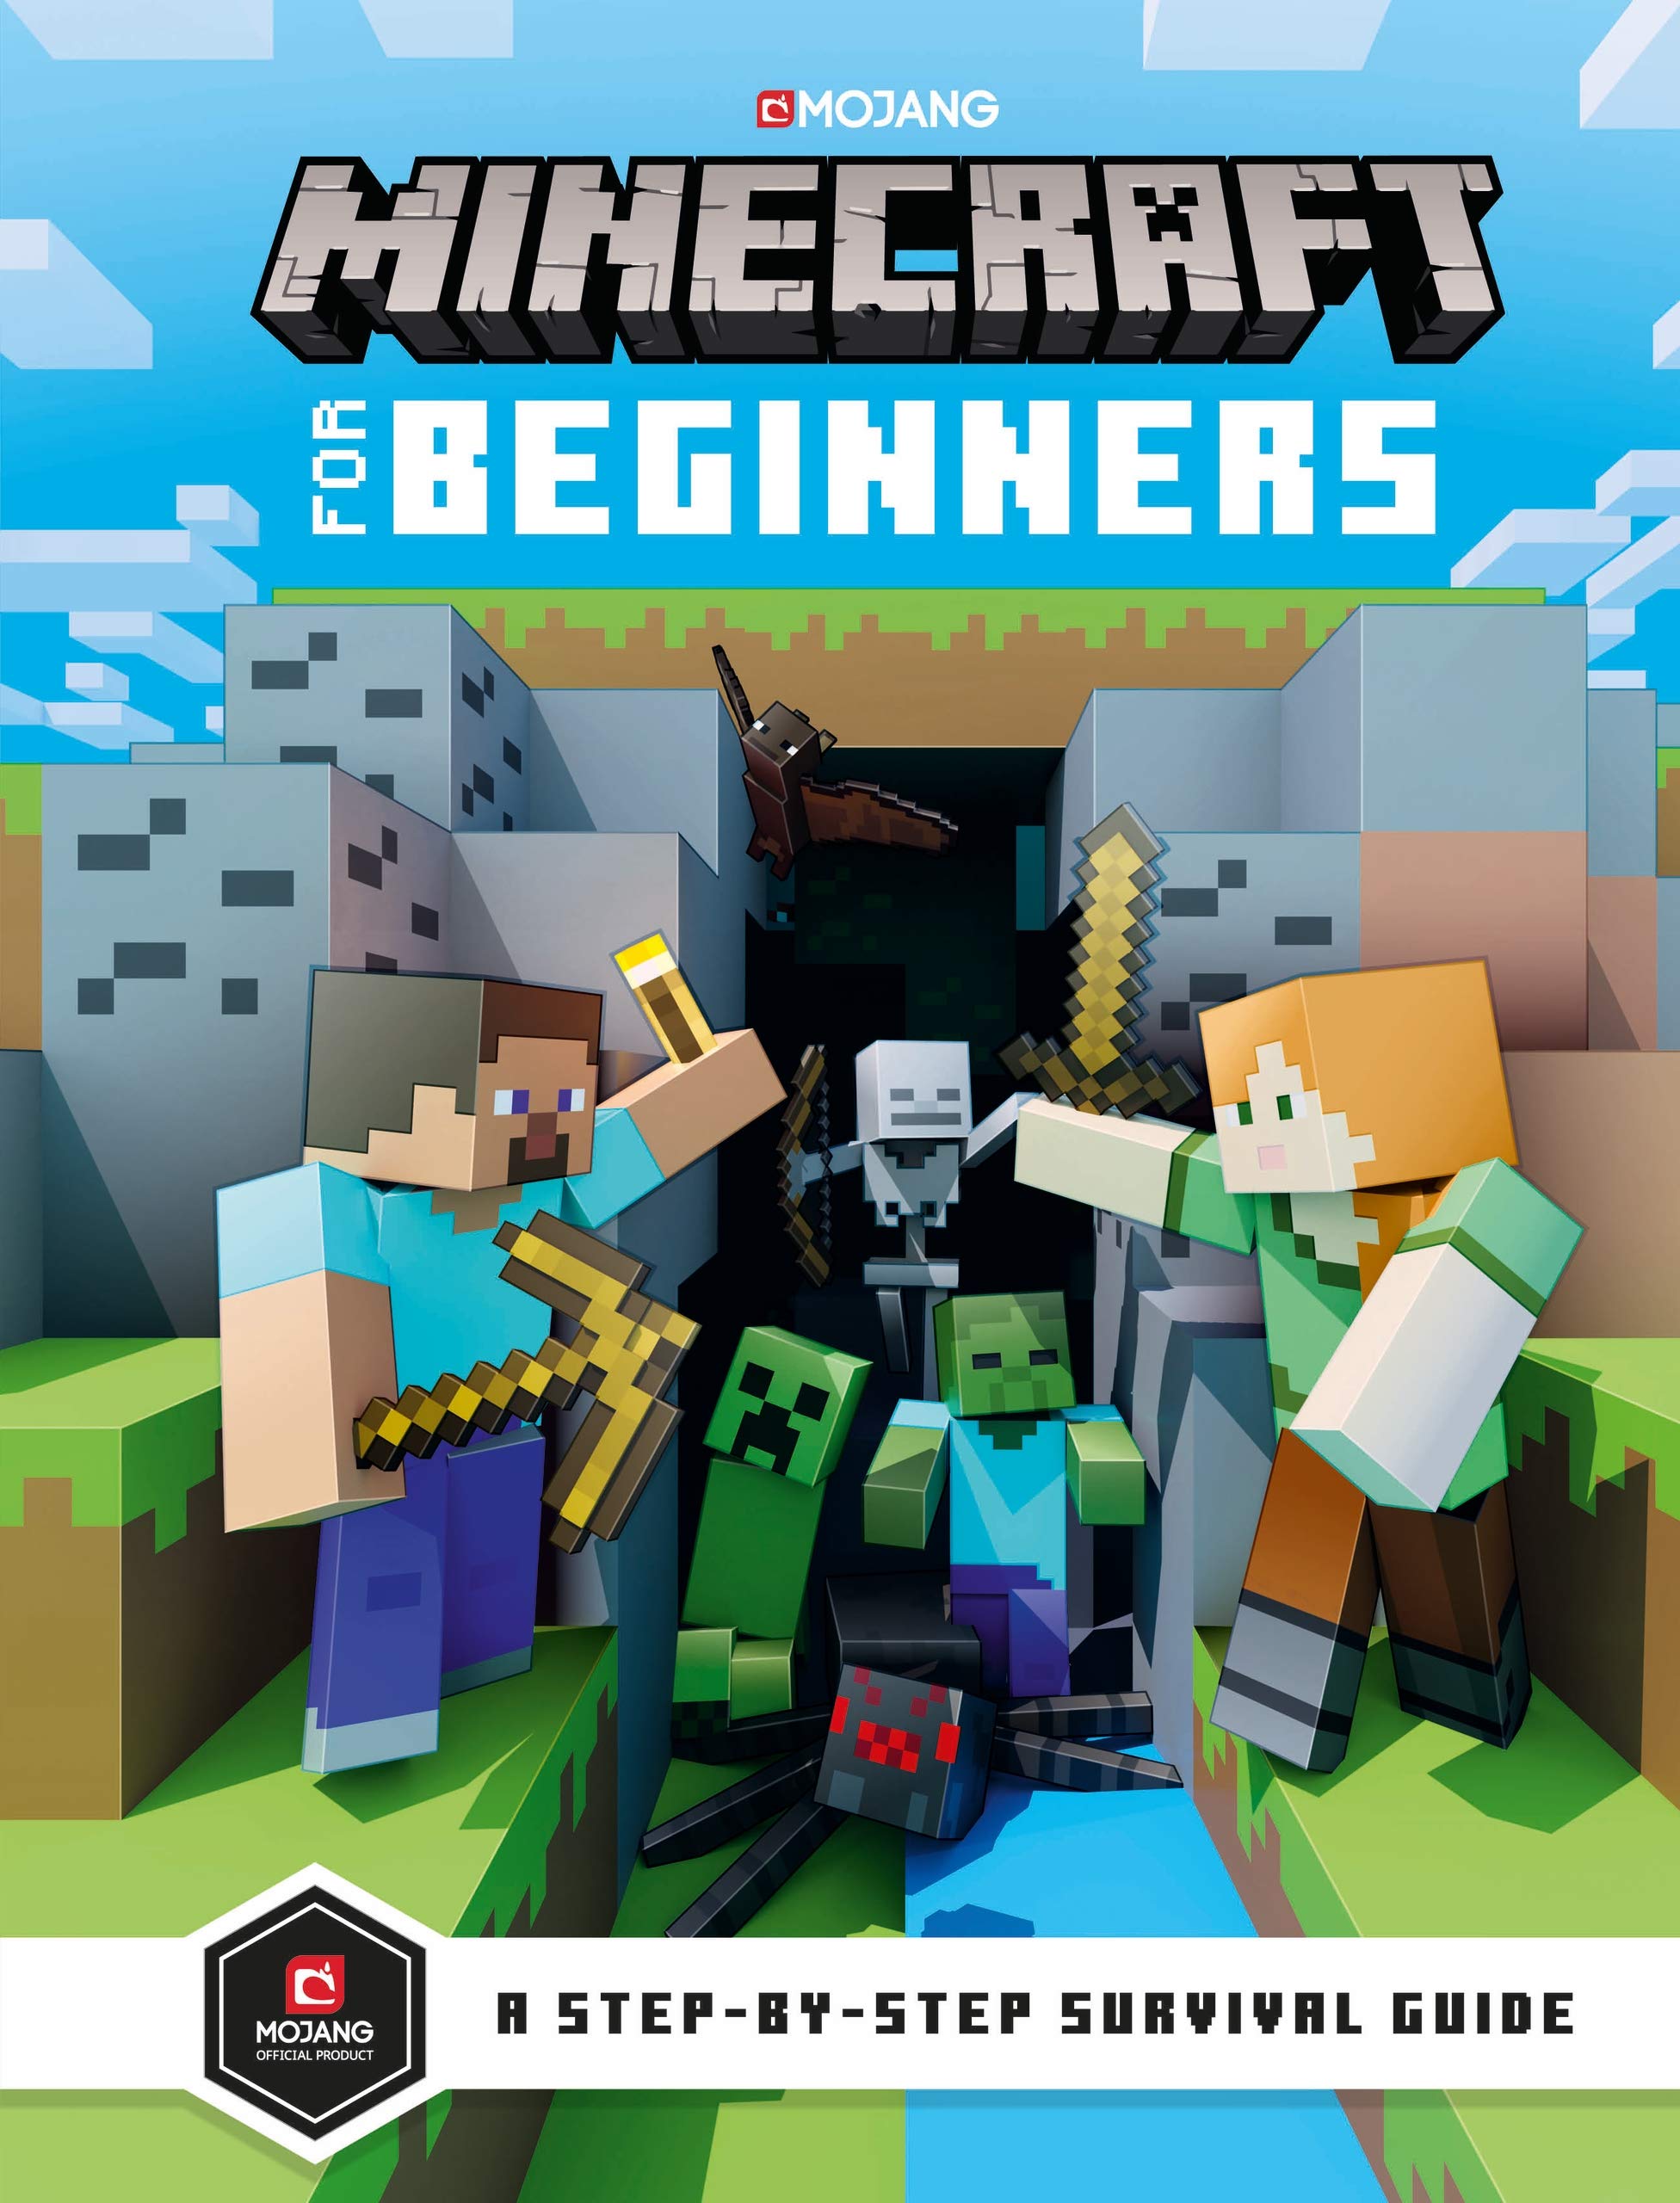 Minecraft for Beginners | Mojang AB